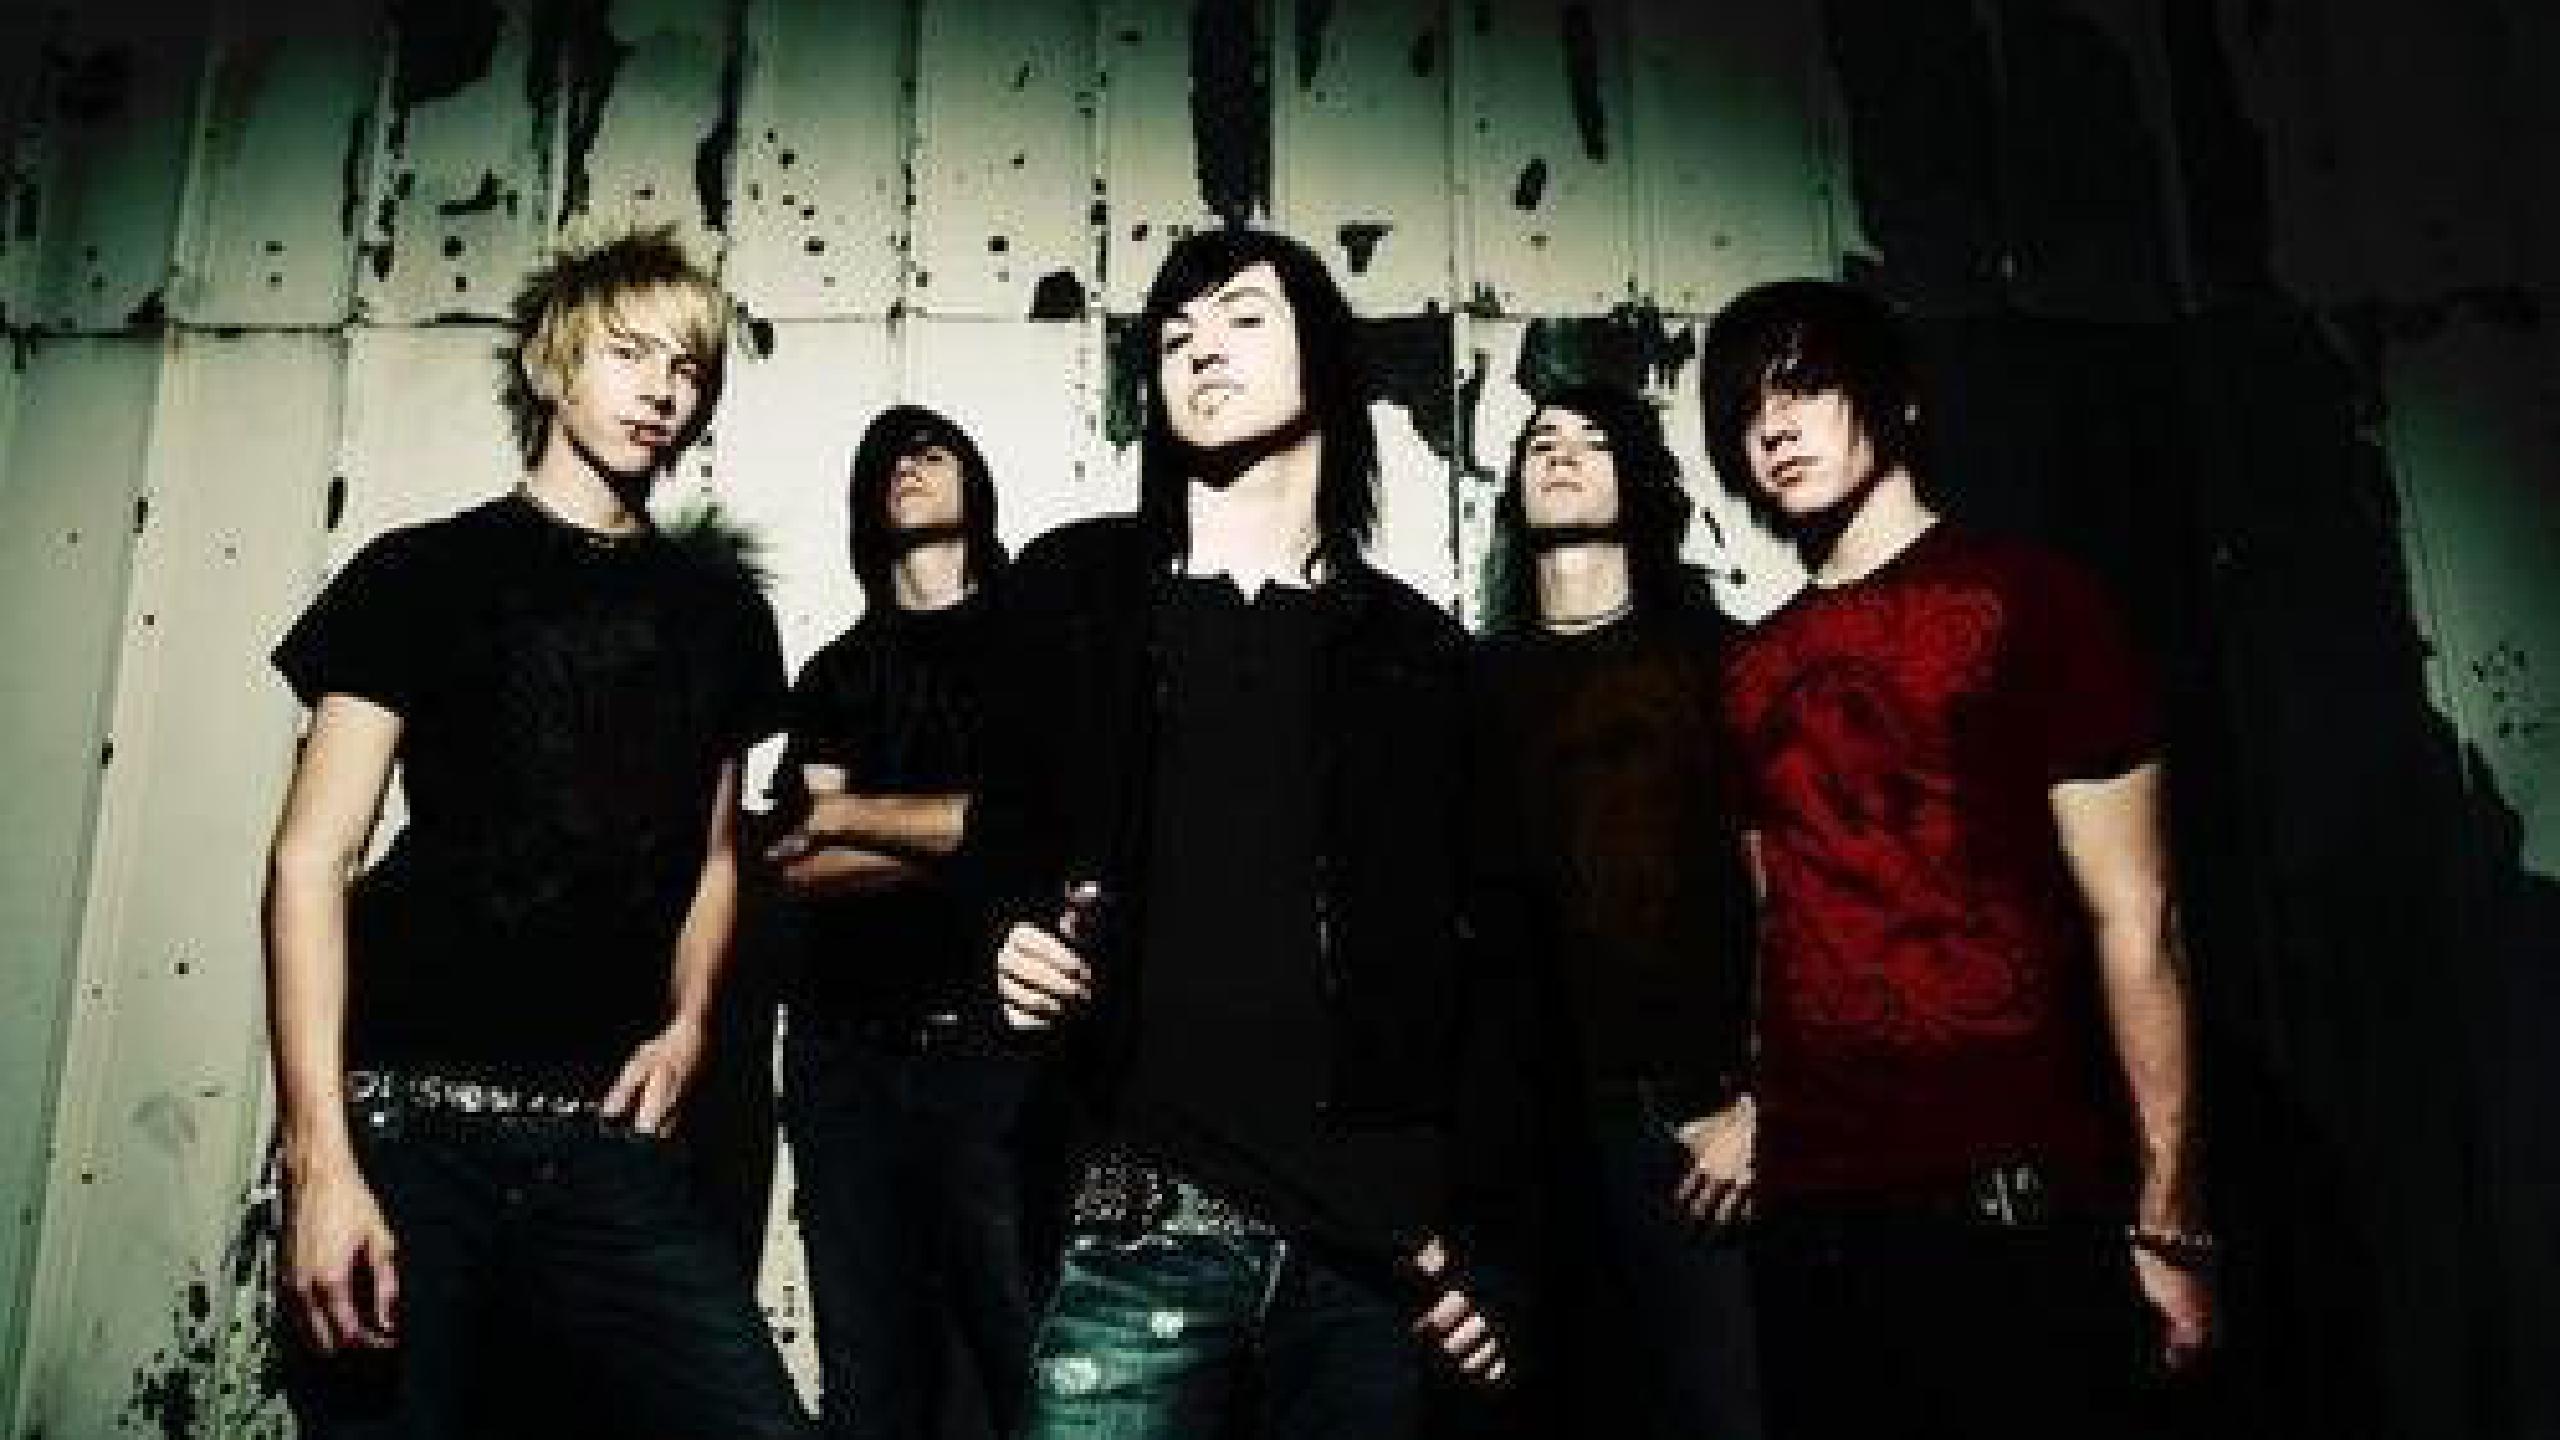 Blessthefall tour dates 2022 2023. Blessthefall tickets and concerts